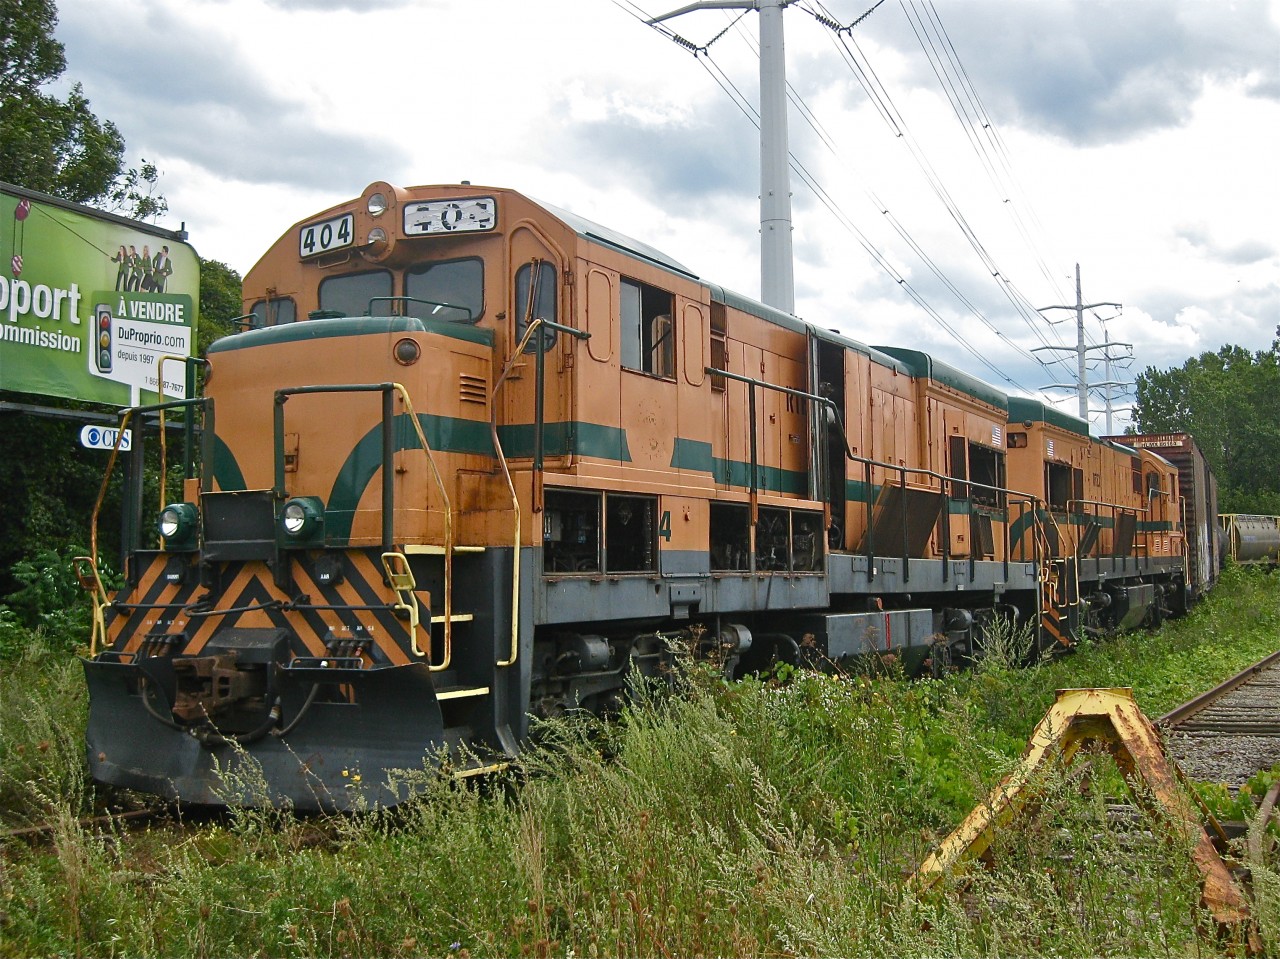 A pair of baby boats. RTEX 404 & RTEX 407 (originally Maine Central 404 & 407) were two U18B's which were in the deadline at CAD in Lachine for many years. They have since been scrapped. For more train photos, click here.